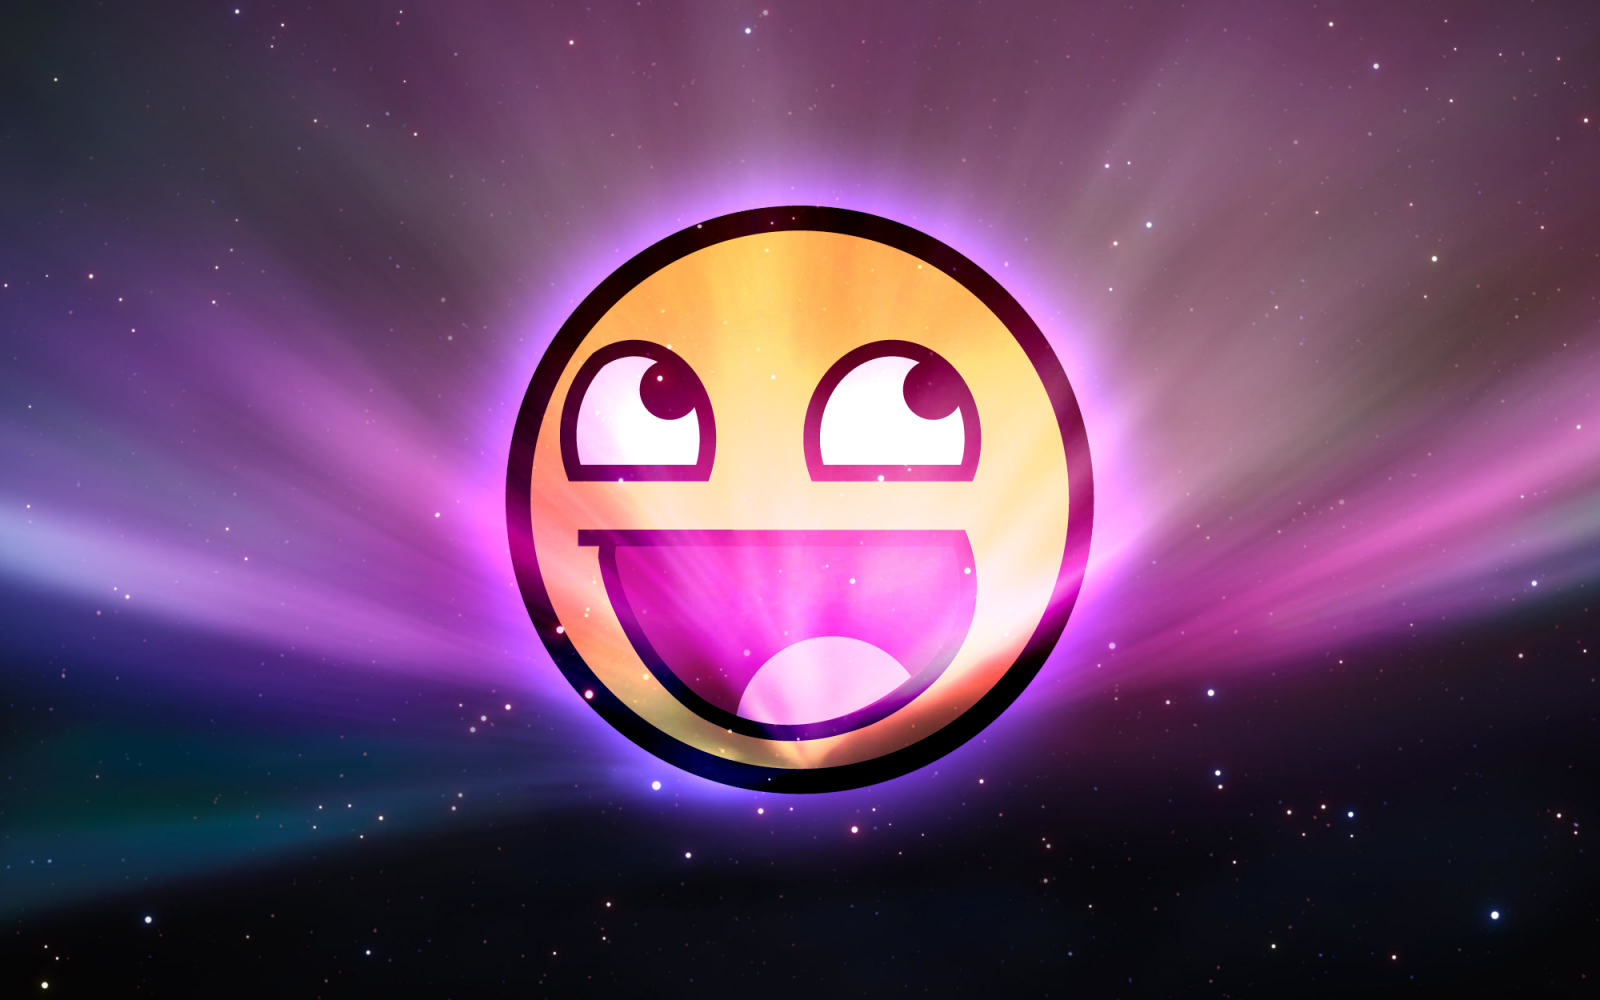 Awesome Smiley Face Wallpapers